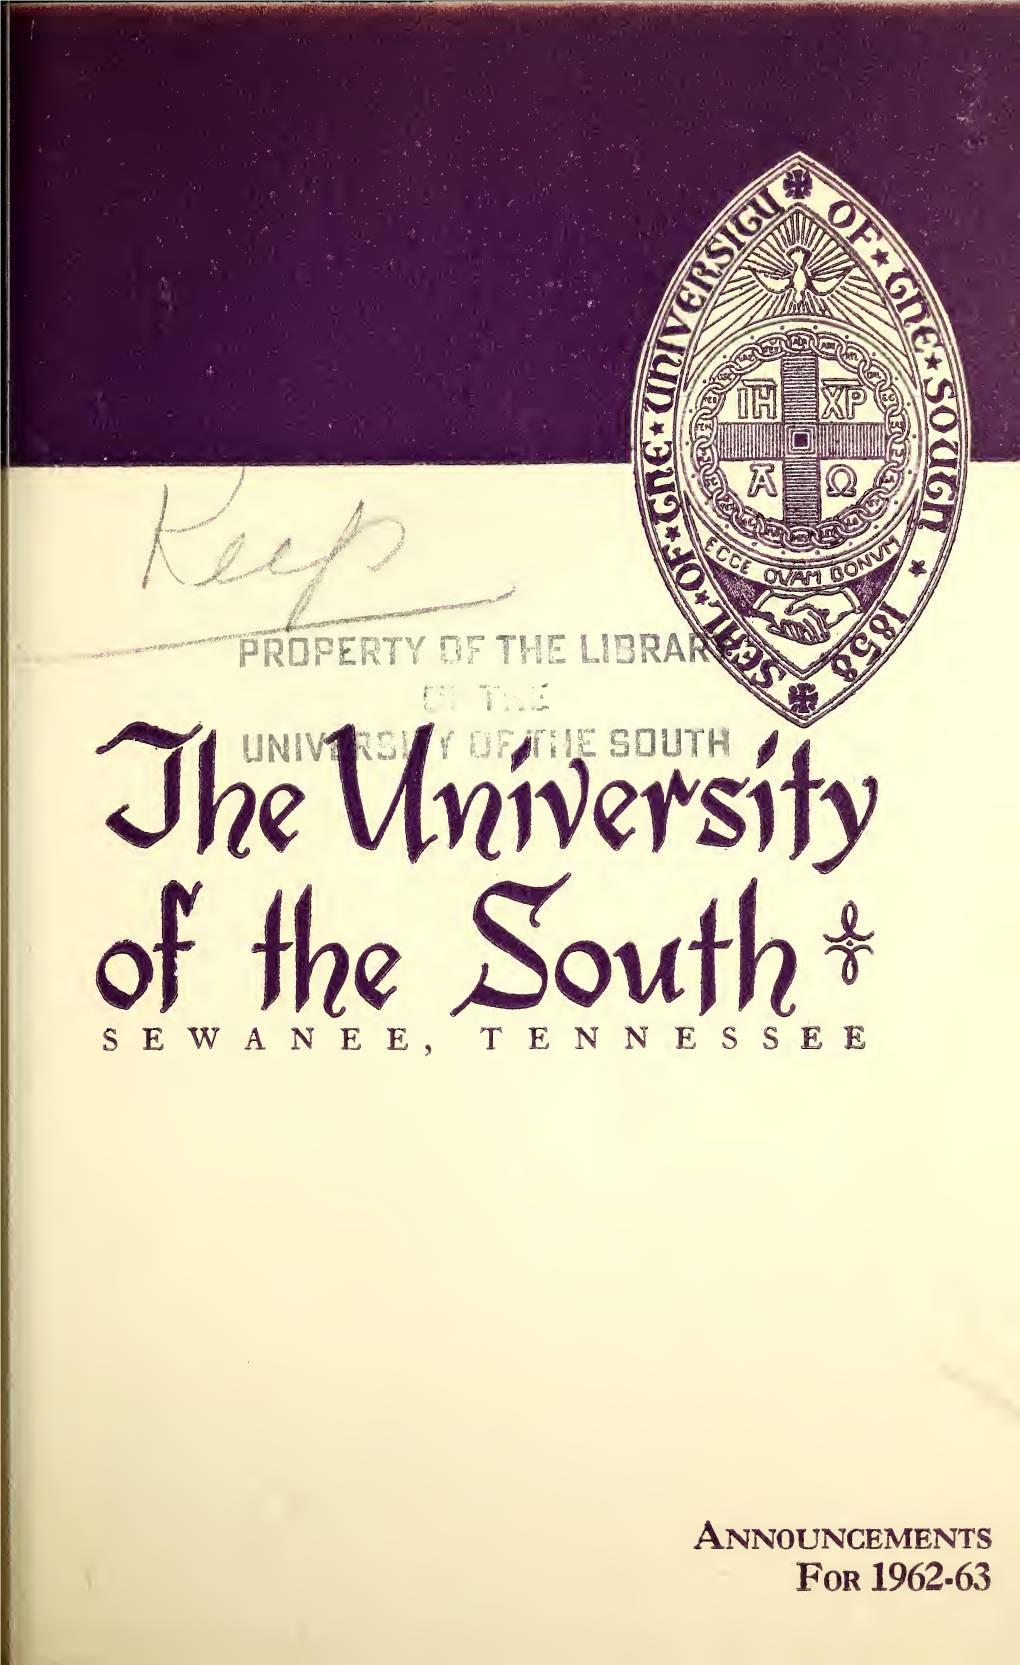 College of Arts and Sciences Catalog and Announcements, 1959-1963